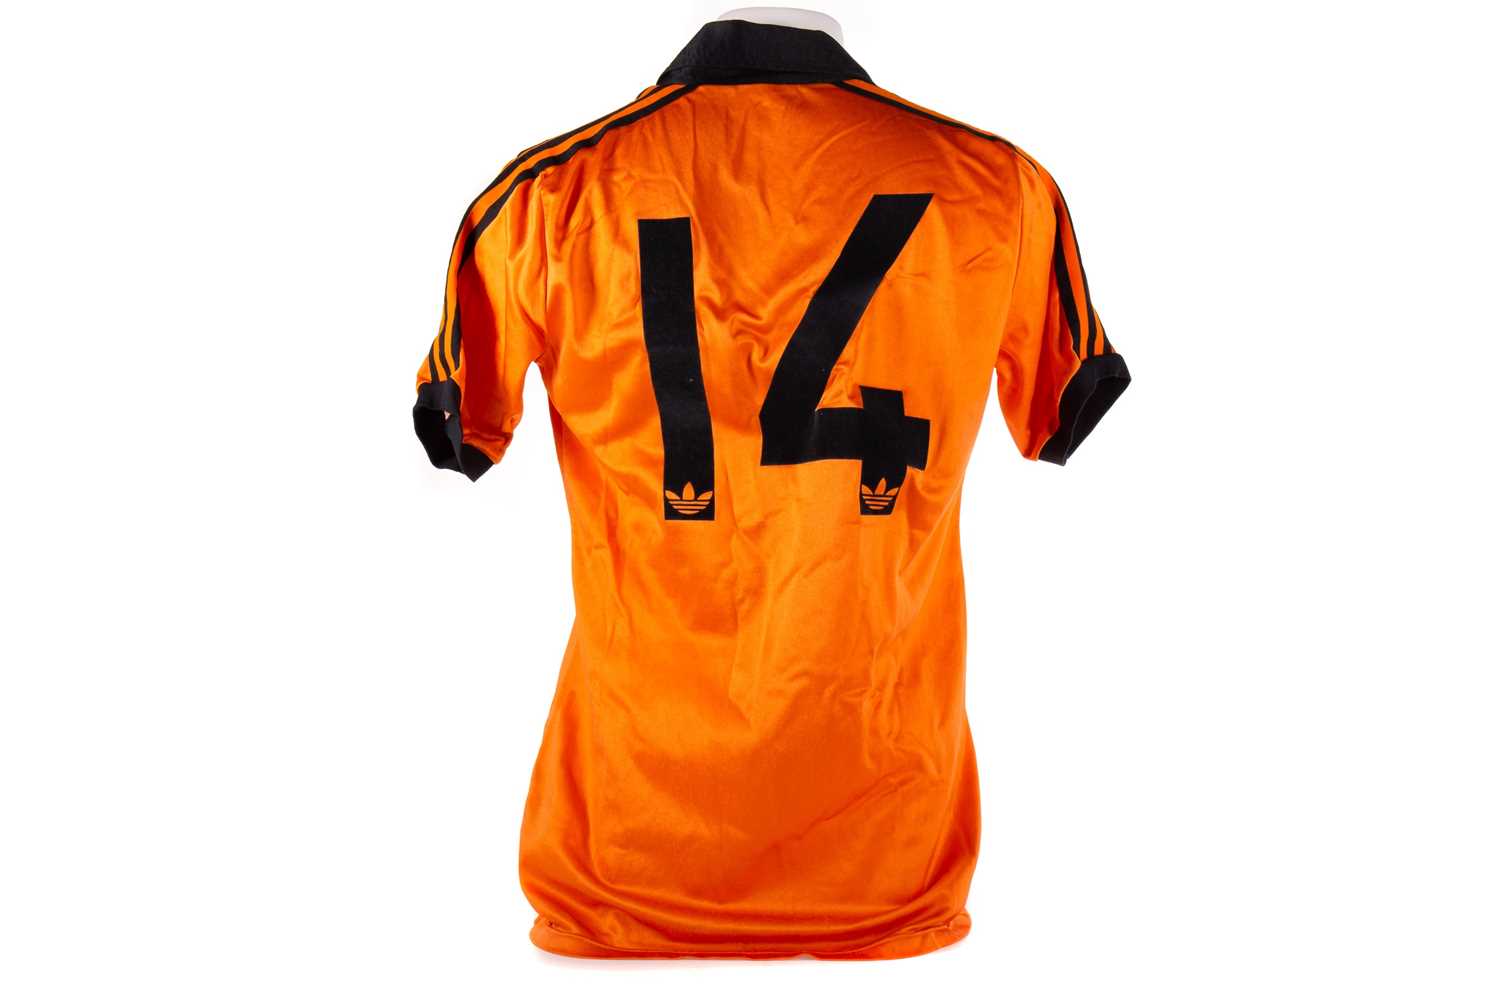 WILLIAM PETTIGREW OF DUNDEE UNITED F.C., HIS SCOTTISH CUP FINAL MATCHWORN SHIRT 1980-81 - Image 2 of 2